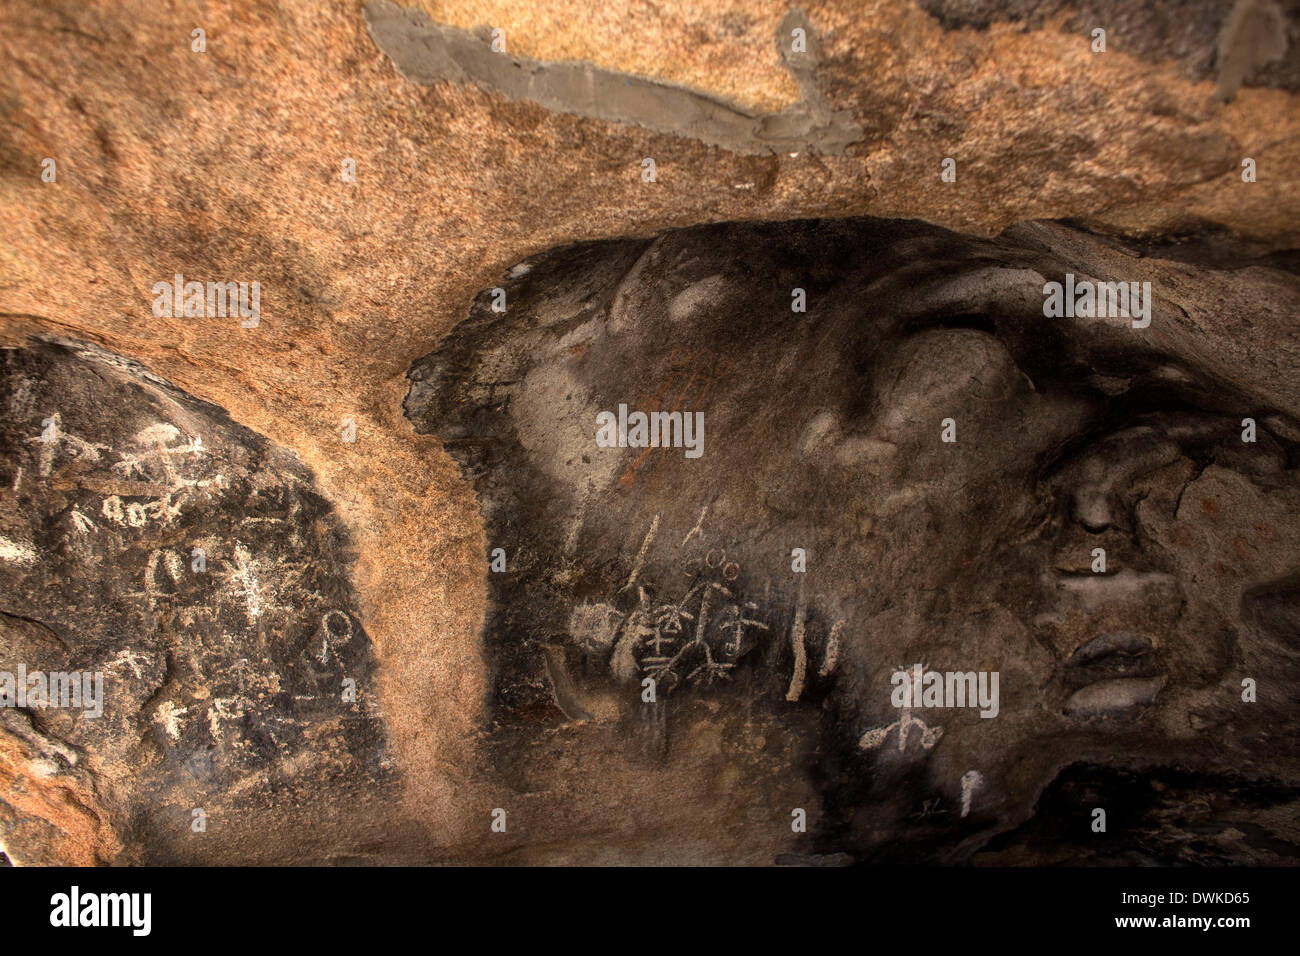 (140311) -- BAJA CALIFORNIA, March 11, 2014 (Xinhua) -- Image taken on March 9, 2014 shows detail of the 'La Cueva del Indio' cave paintings in the archaelogical site of 'El Vallecito' near La Rumorosa town Baja California, northwest of Mexico. According to the National Institute of Antropology and History (INAH, its acronym in Spanish), El Vallecito was occupied by members of the Yuman linguistic family, which originally lived in the northwest area of the state of Baja California and southern California. At the site there are rock paintings of simple lines traced with mineral dyes in white, r Stock Photo